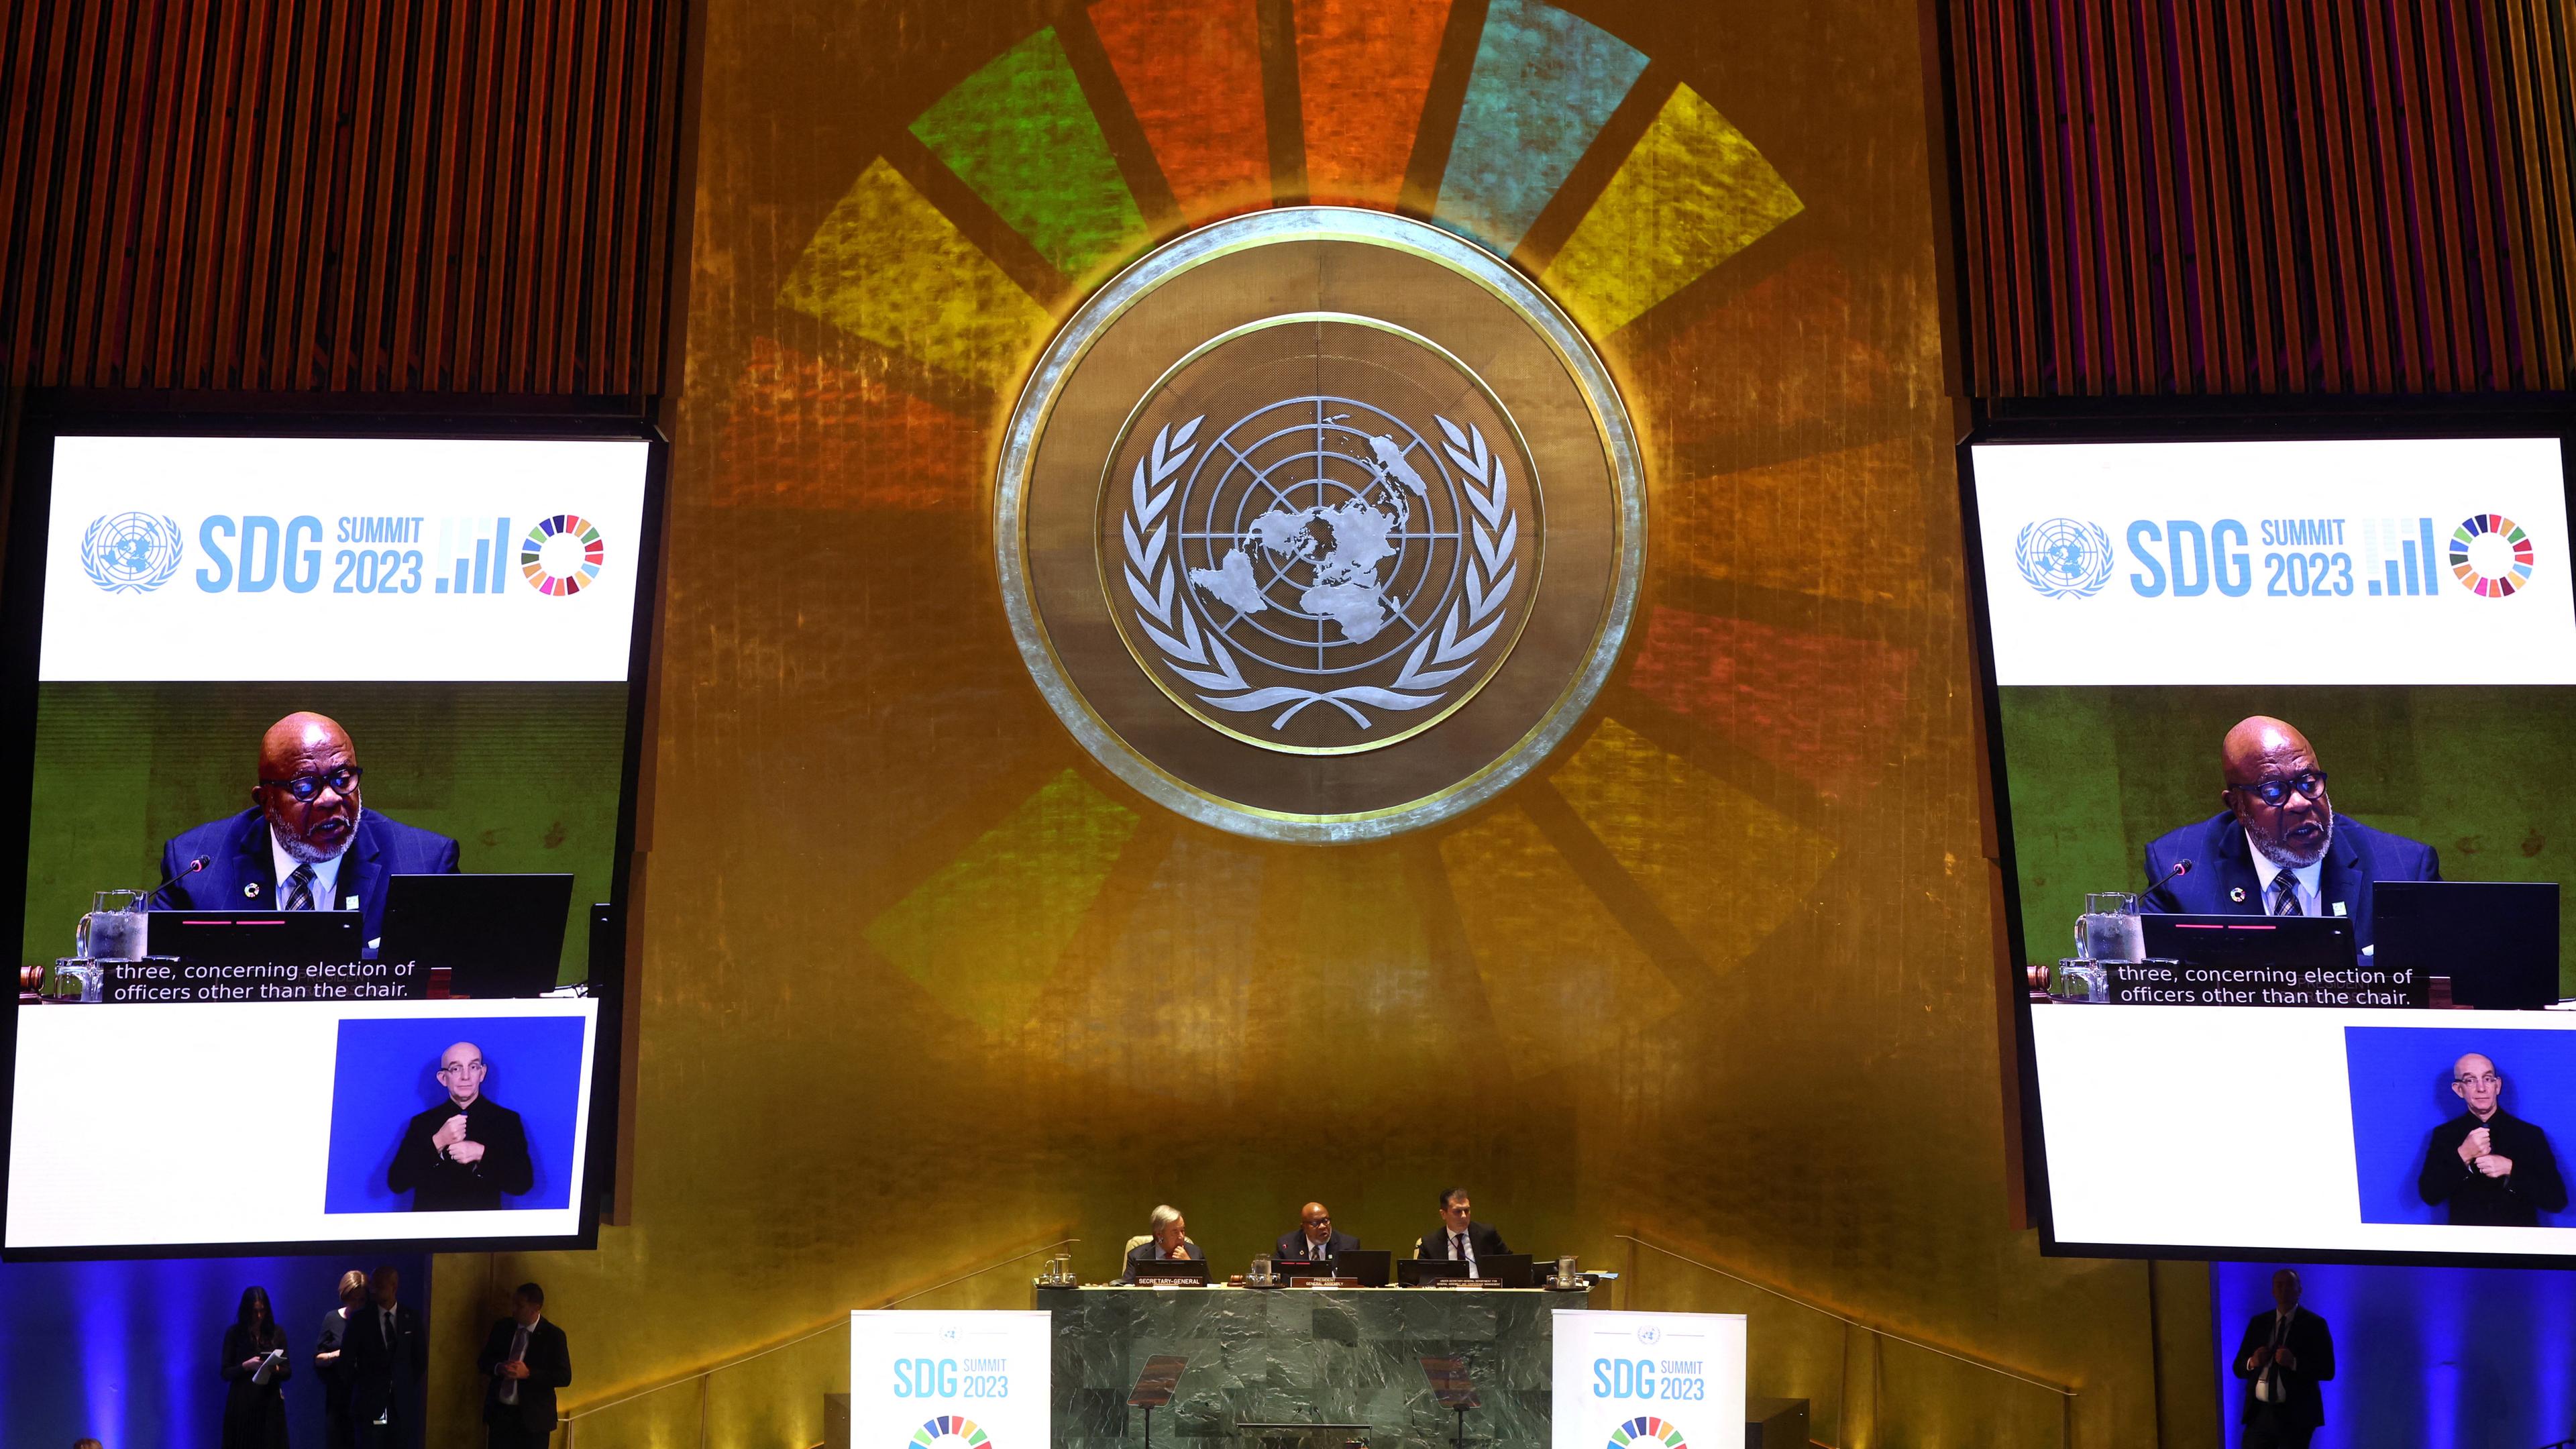 United Nations General Assembly President Dennis Francis makes an opening statement of the Sustainable Development Goals (SDG) Summit 2023, at U.N. headquarters in New York City, New York, U.S., September 18, 2023